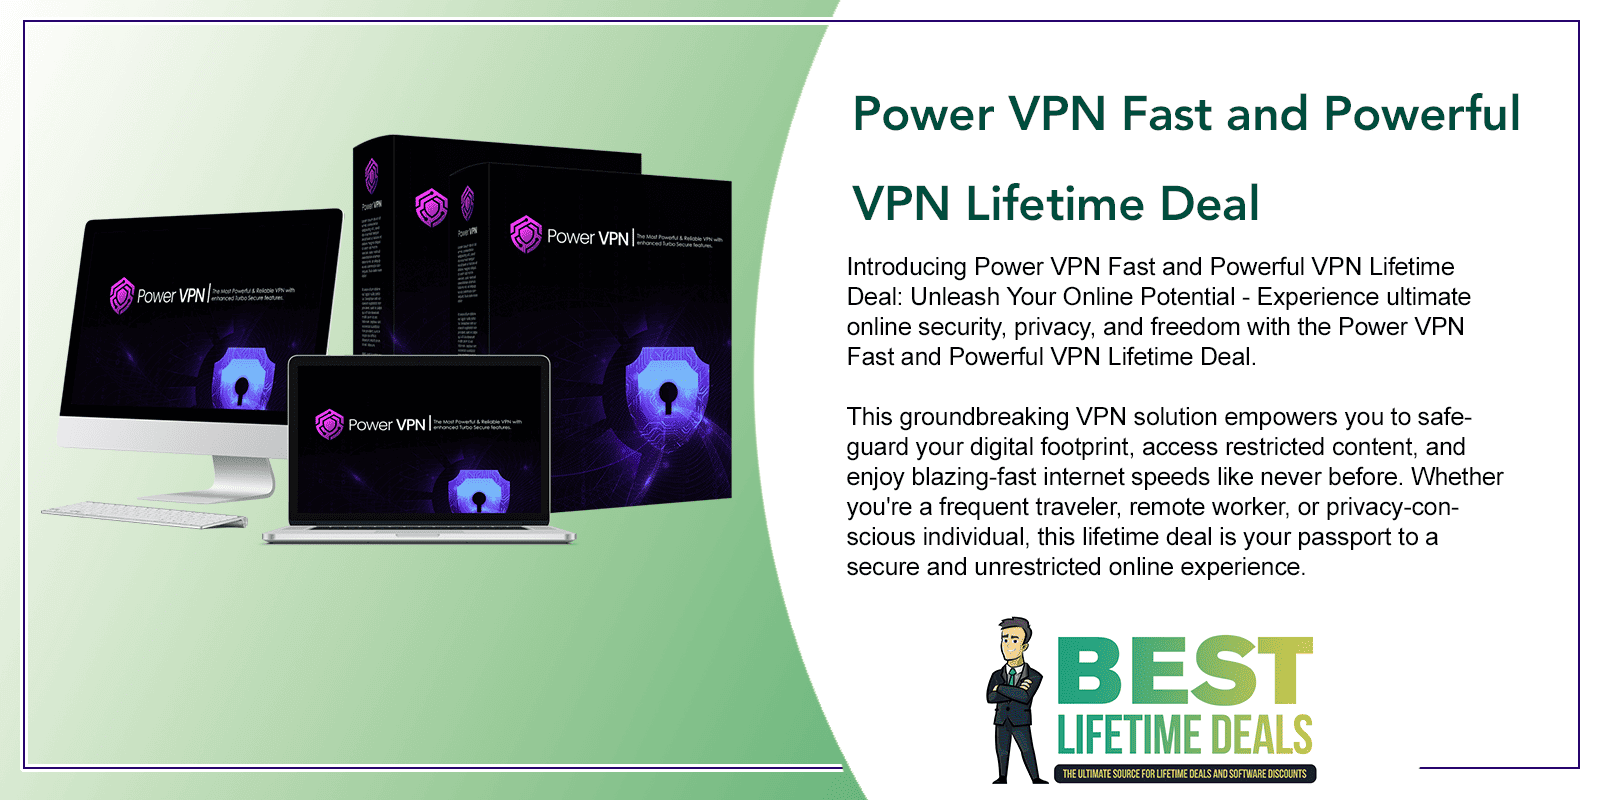 Power VPN Fast and Powerful VPN Lifetime Deal Featured Image